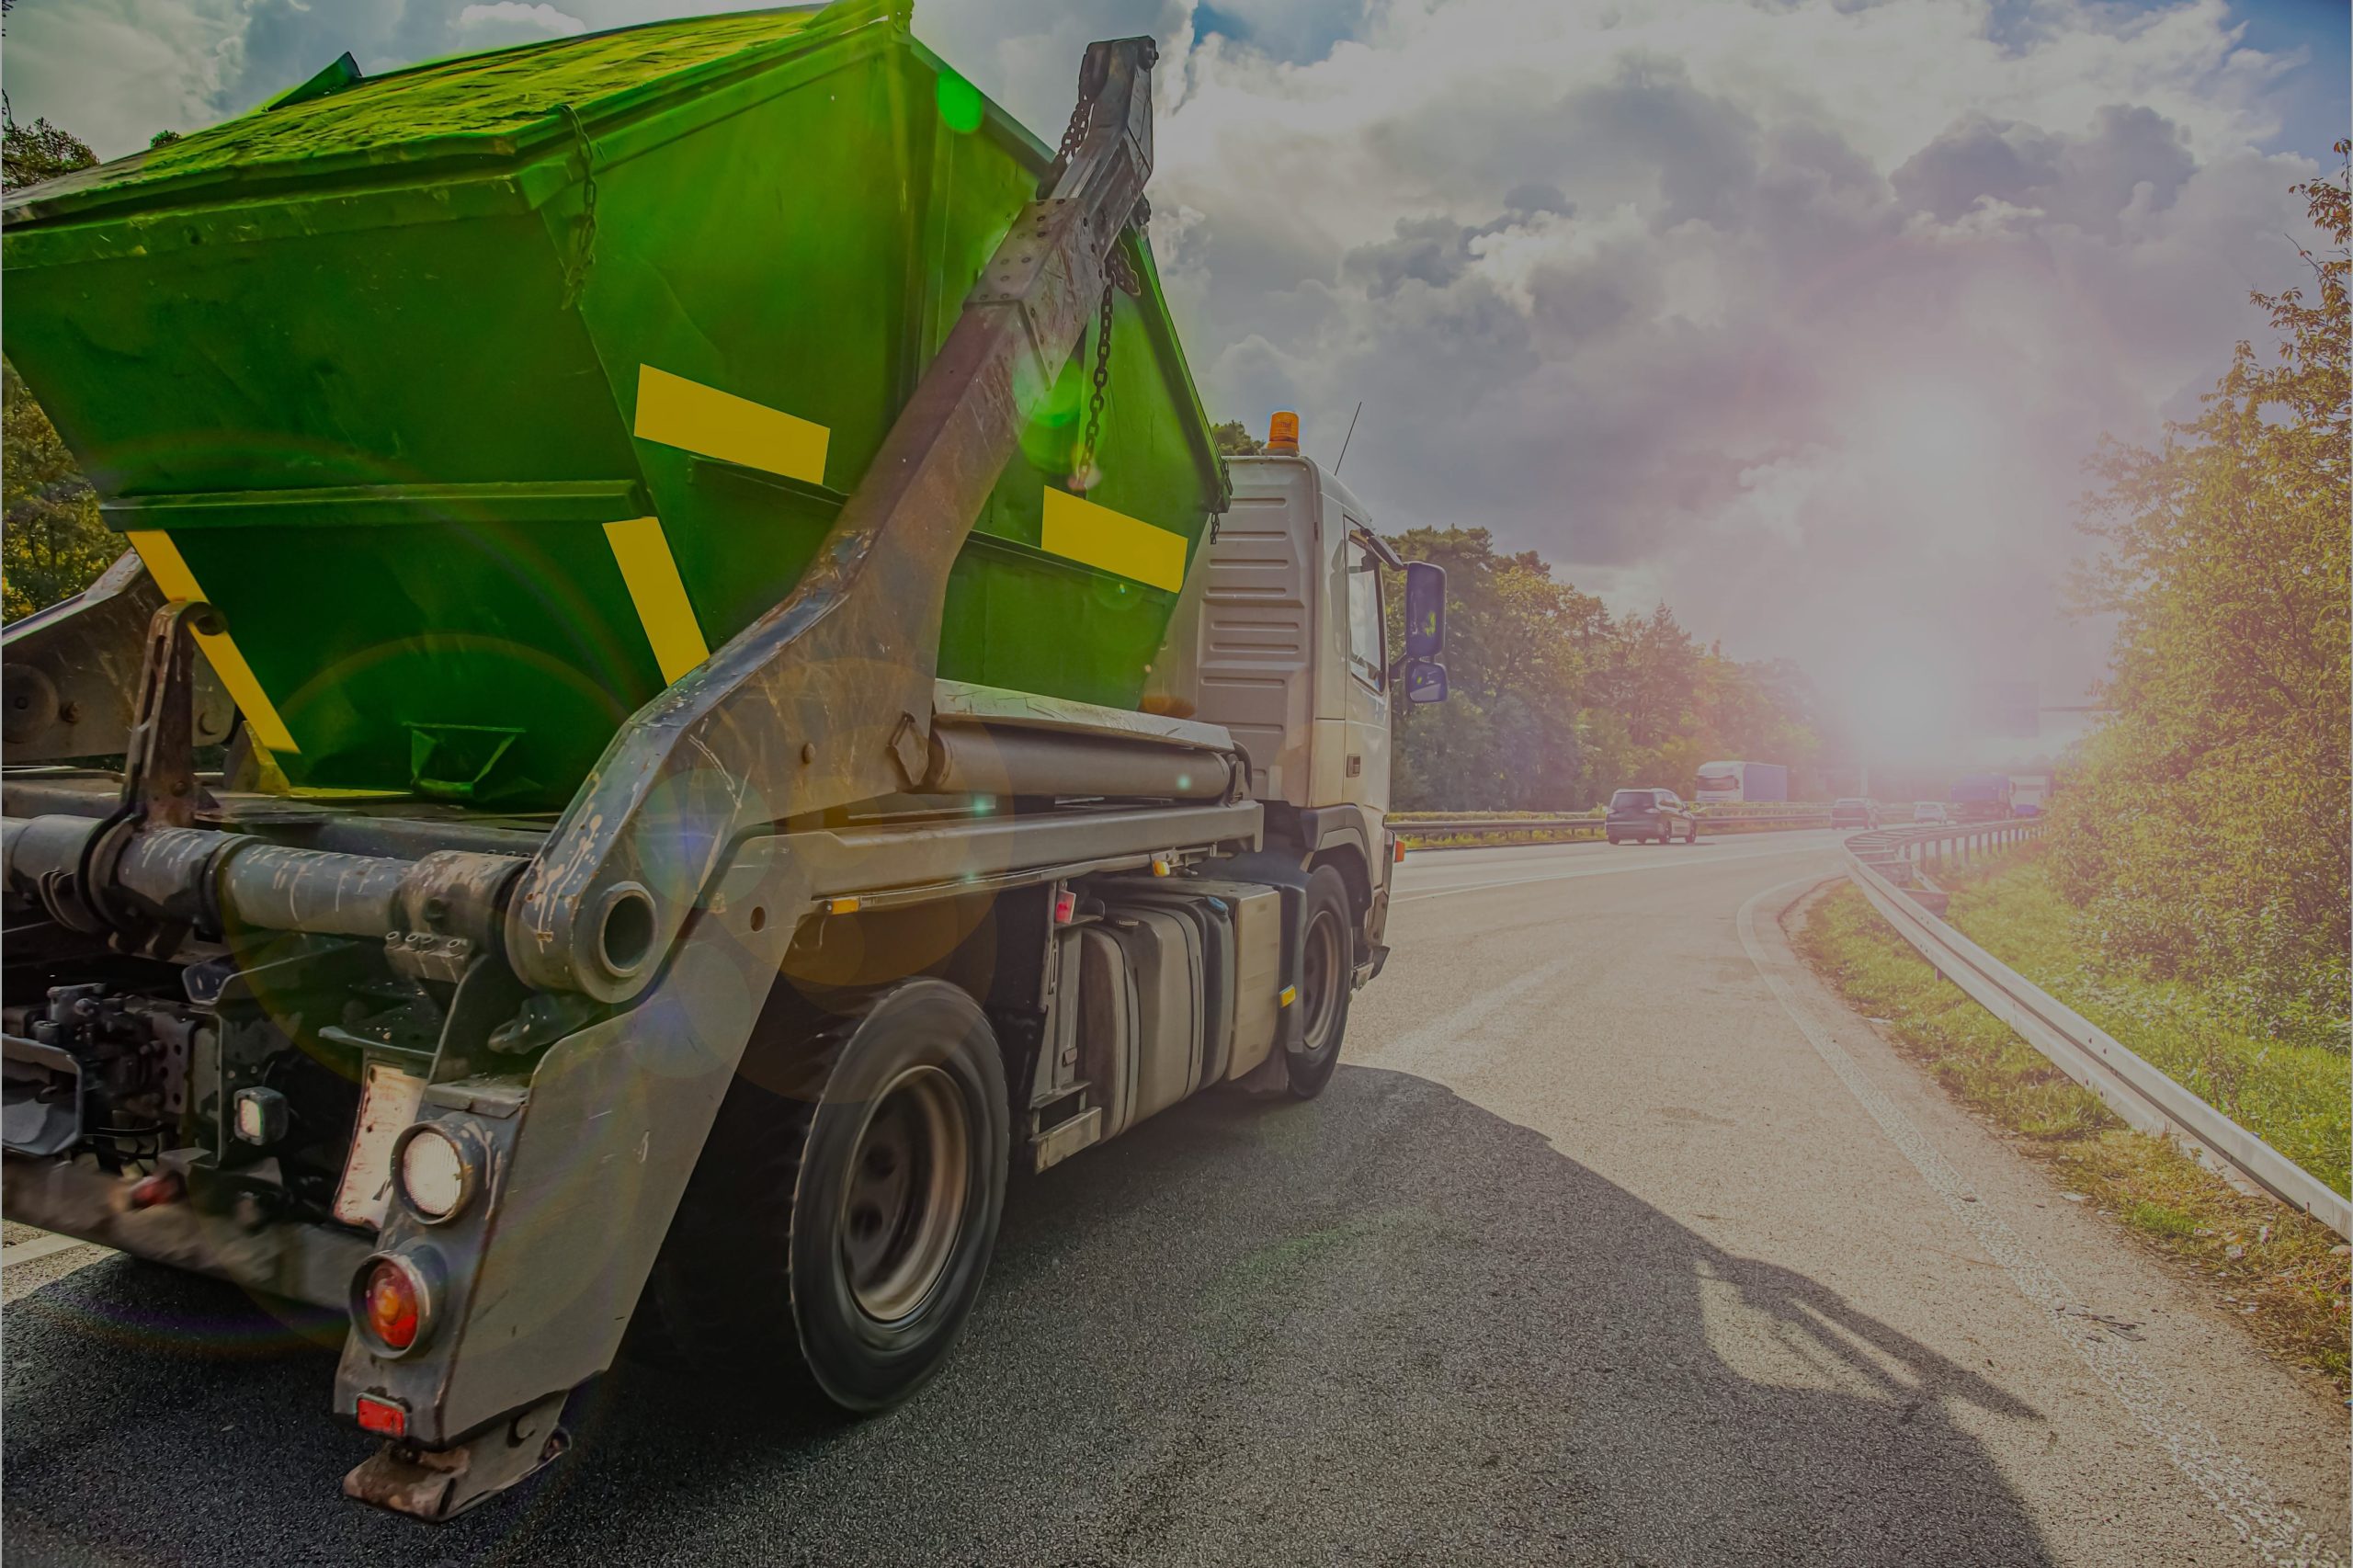 click and its gone waste management waste collection